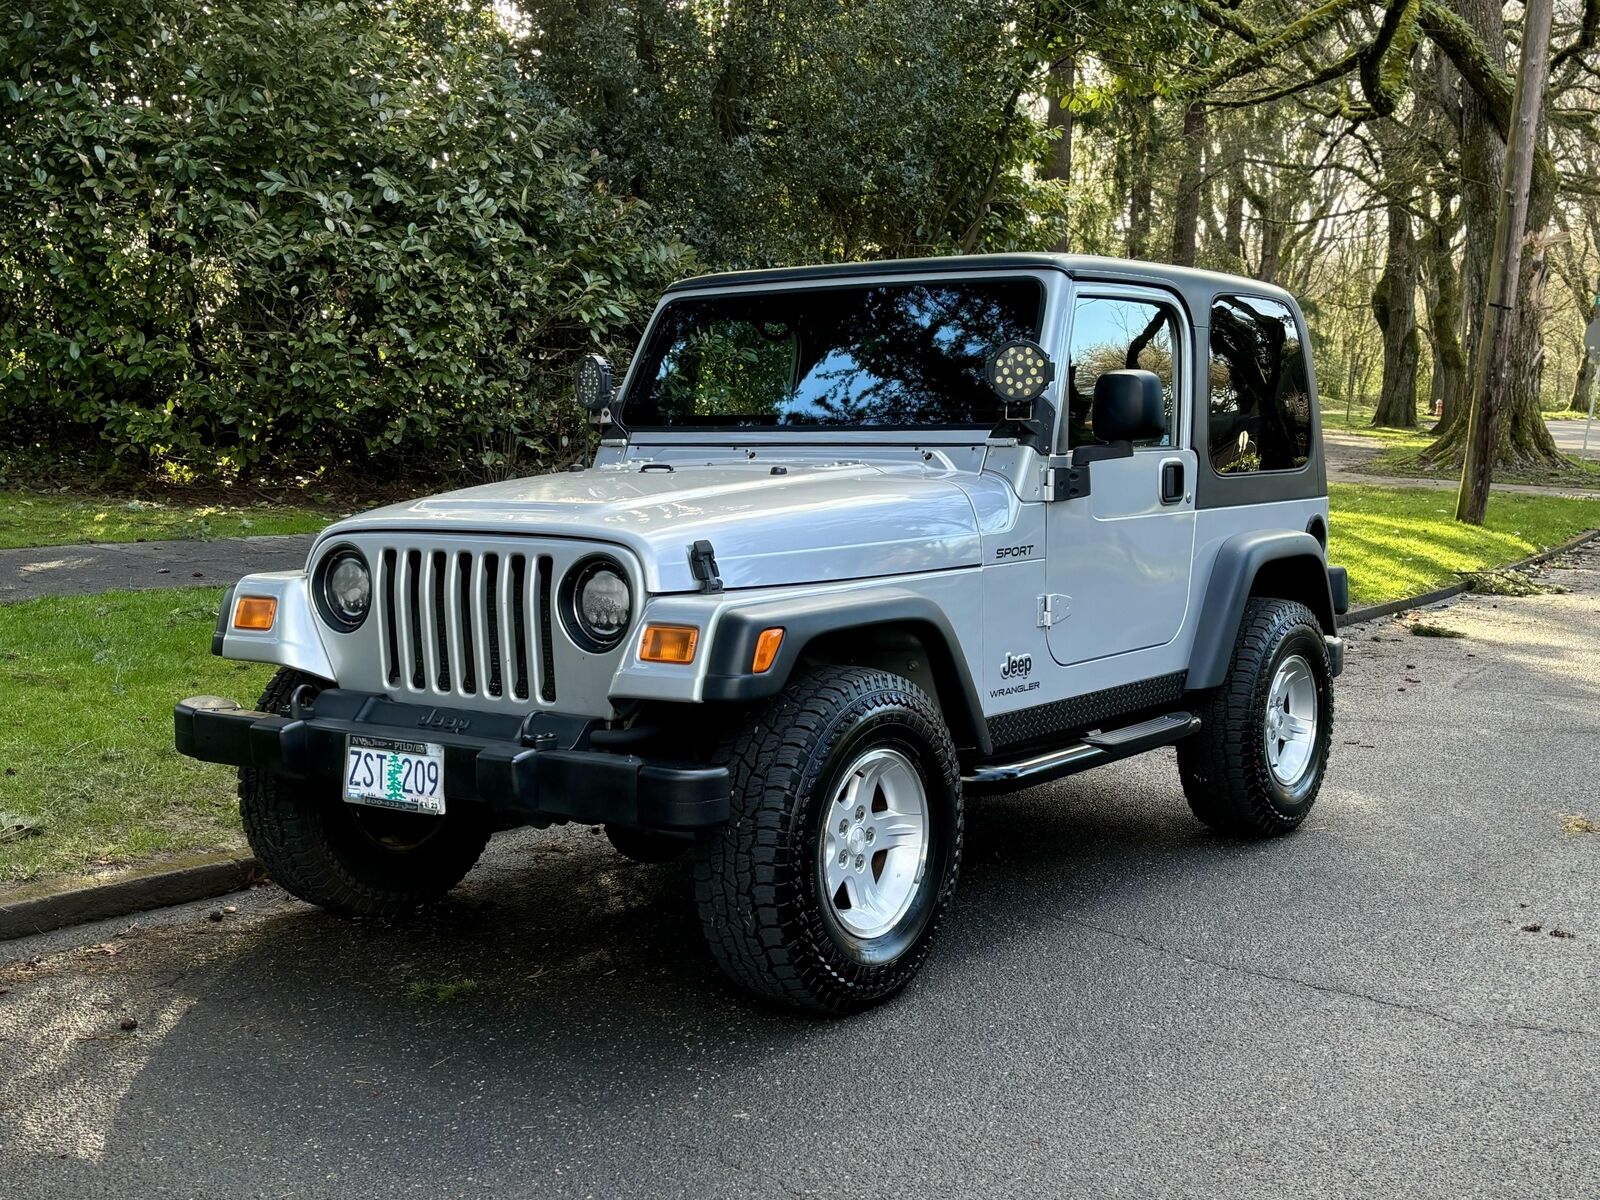 Owner 2004 JEEP WRANGLER SPORT 4X4 5-SPEED 2DR HARD TOP SUV 4.0L 6'CYL ONLY 114K MILES